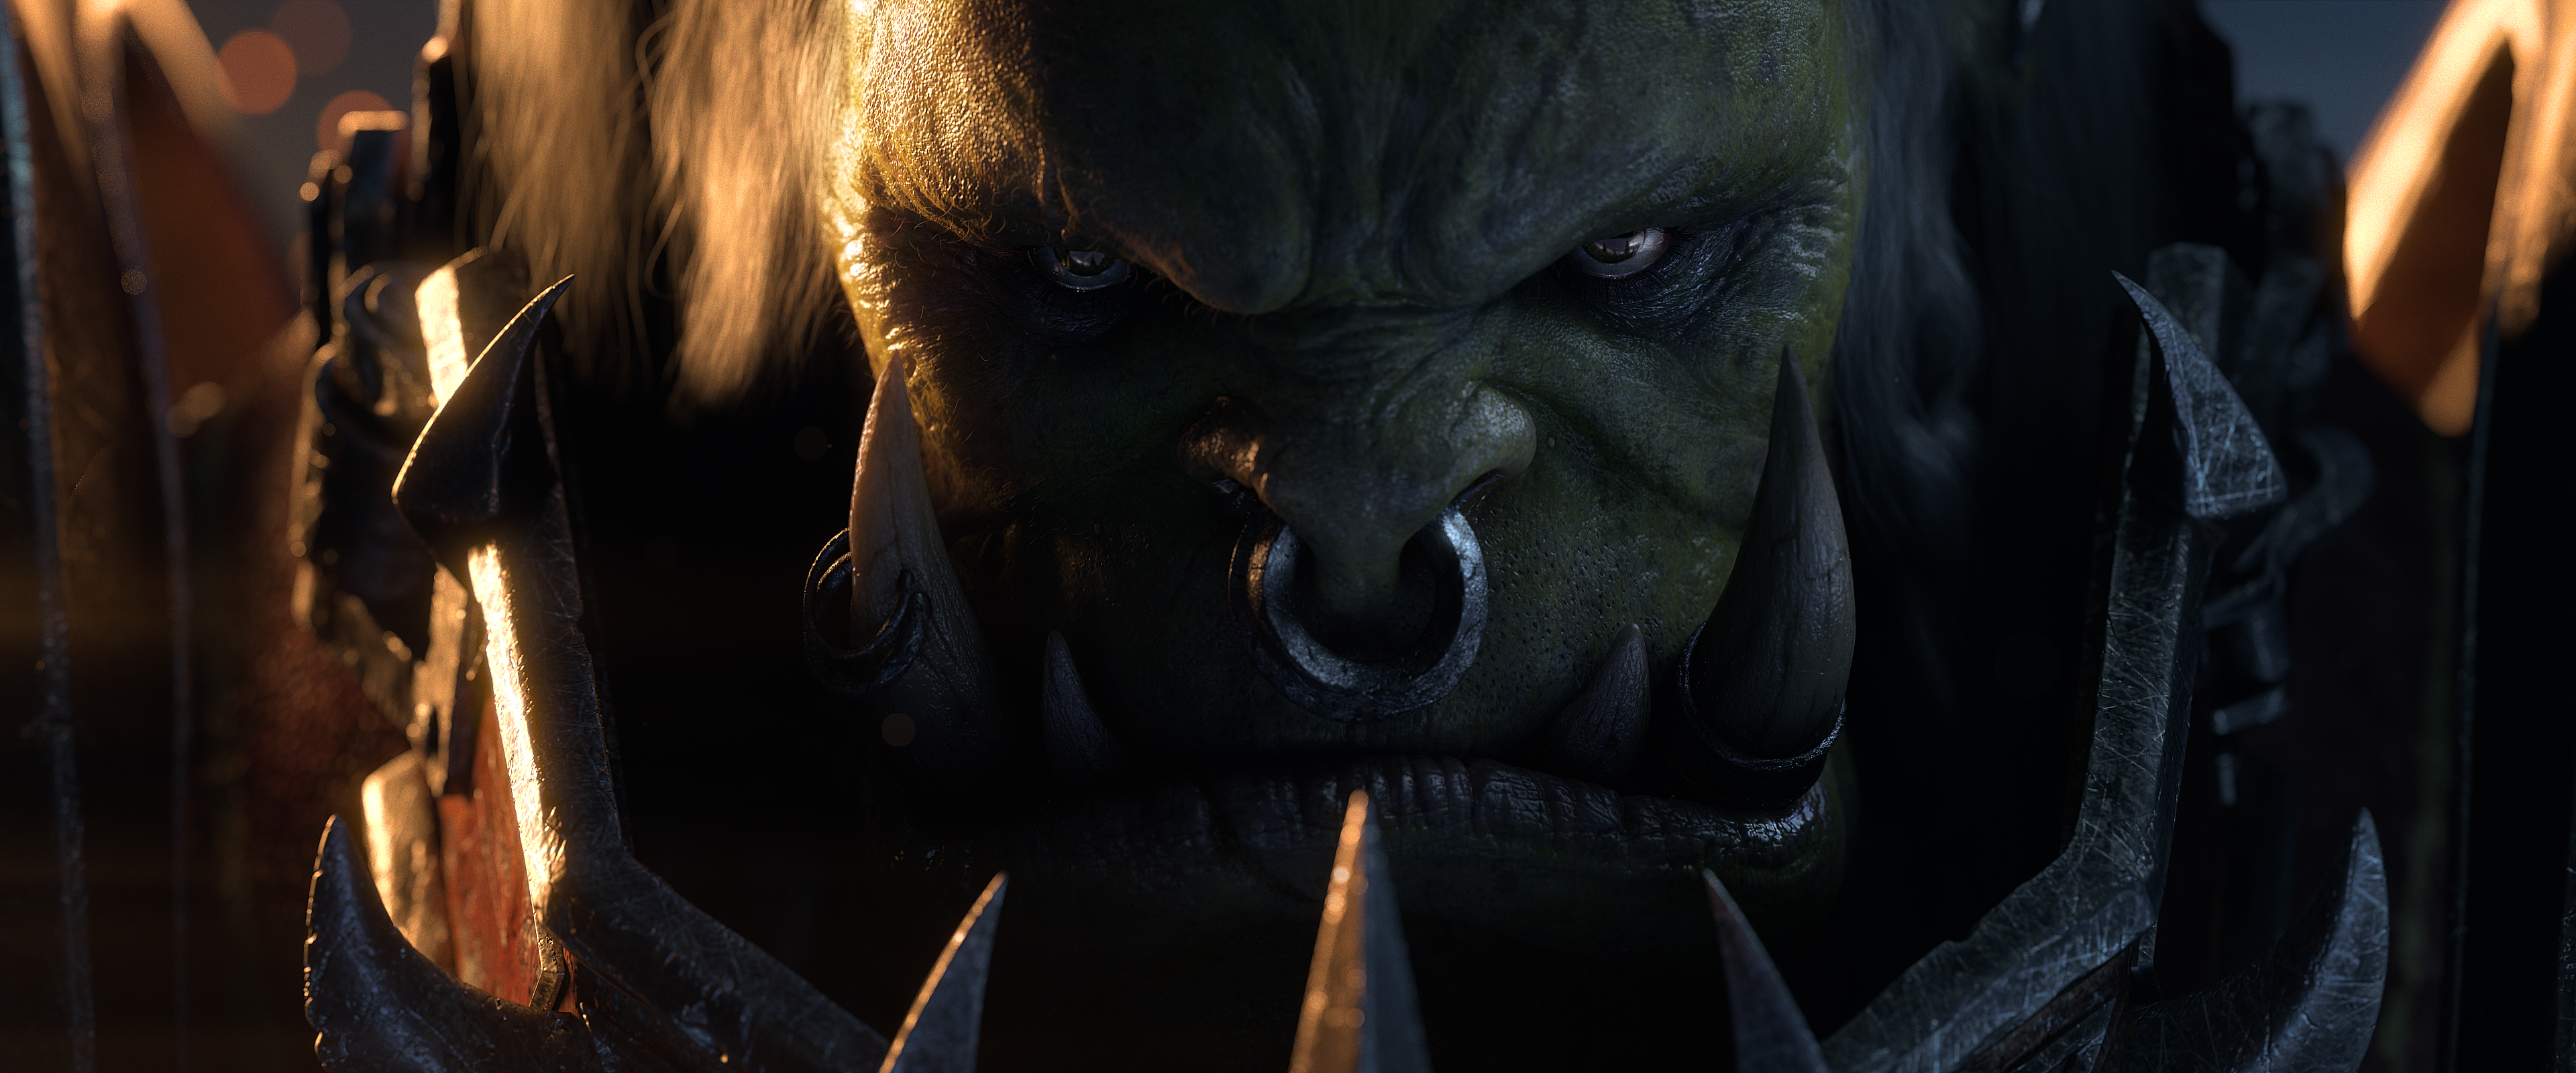 General 3840x1600 World of Warcraft World of Warcraft: Battle for Azeroth nose ring orcs video games Blizzard Entertainment